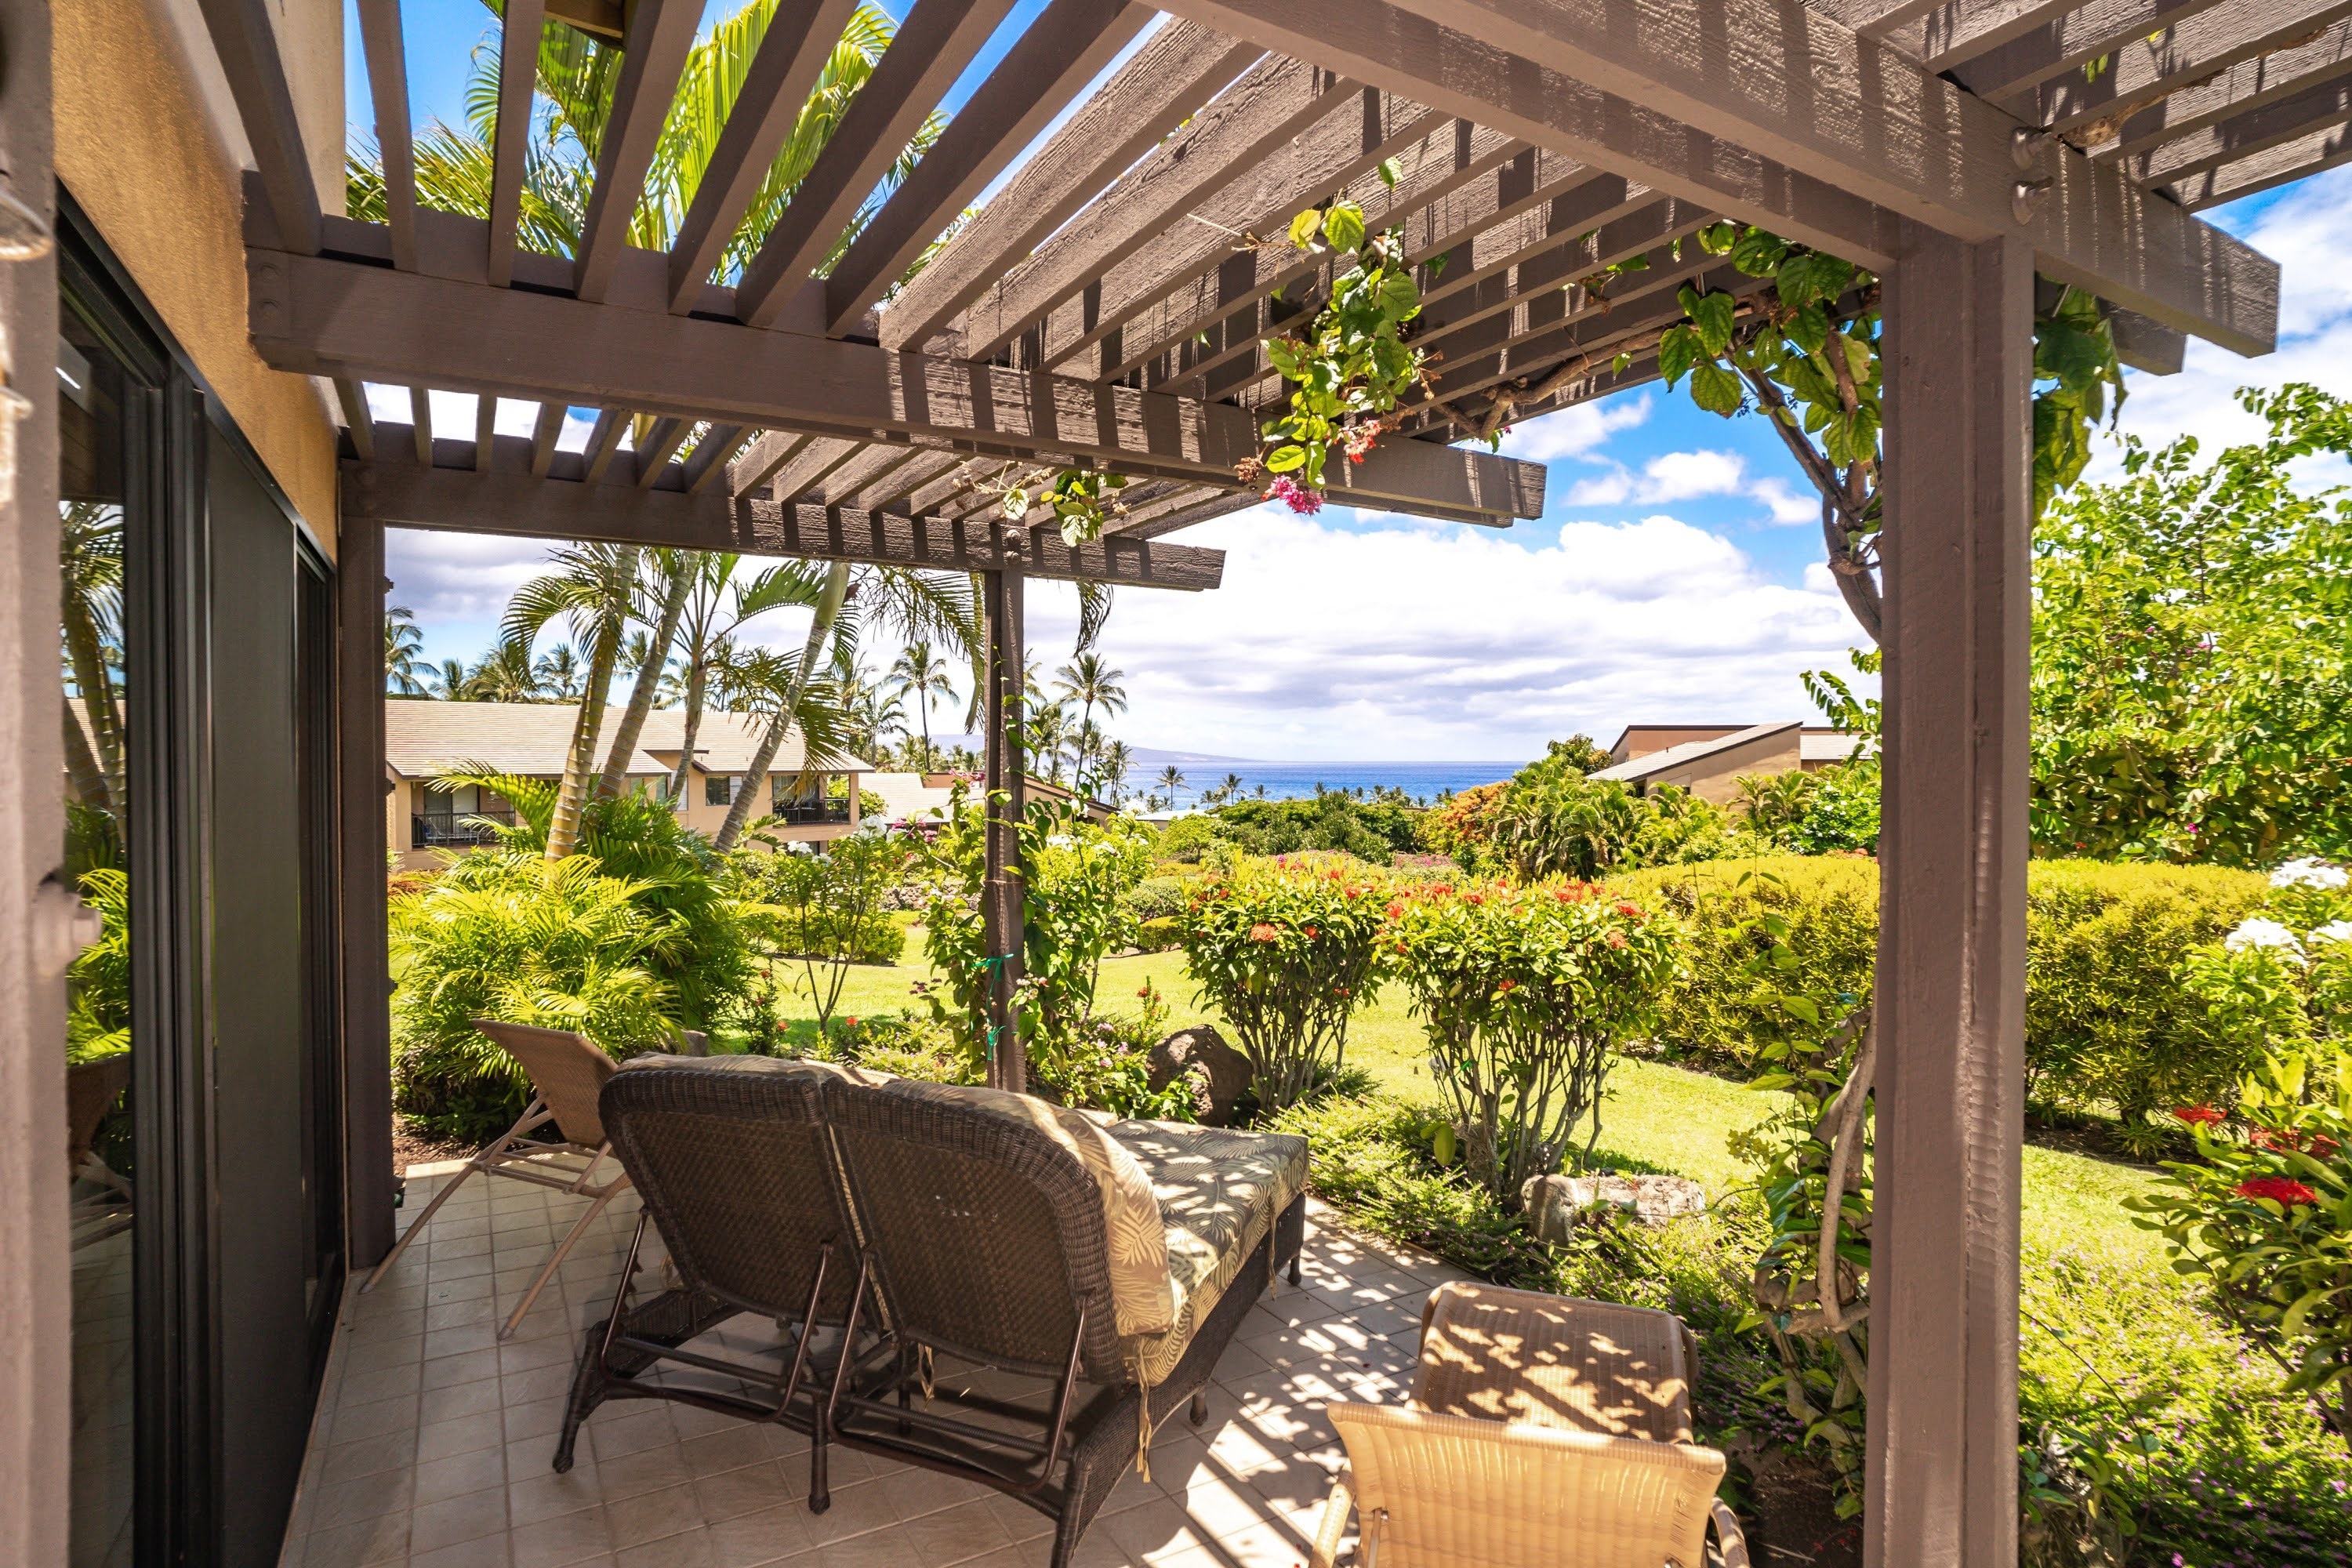 Unwind & enjoy the tropical view from the private lanai